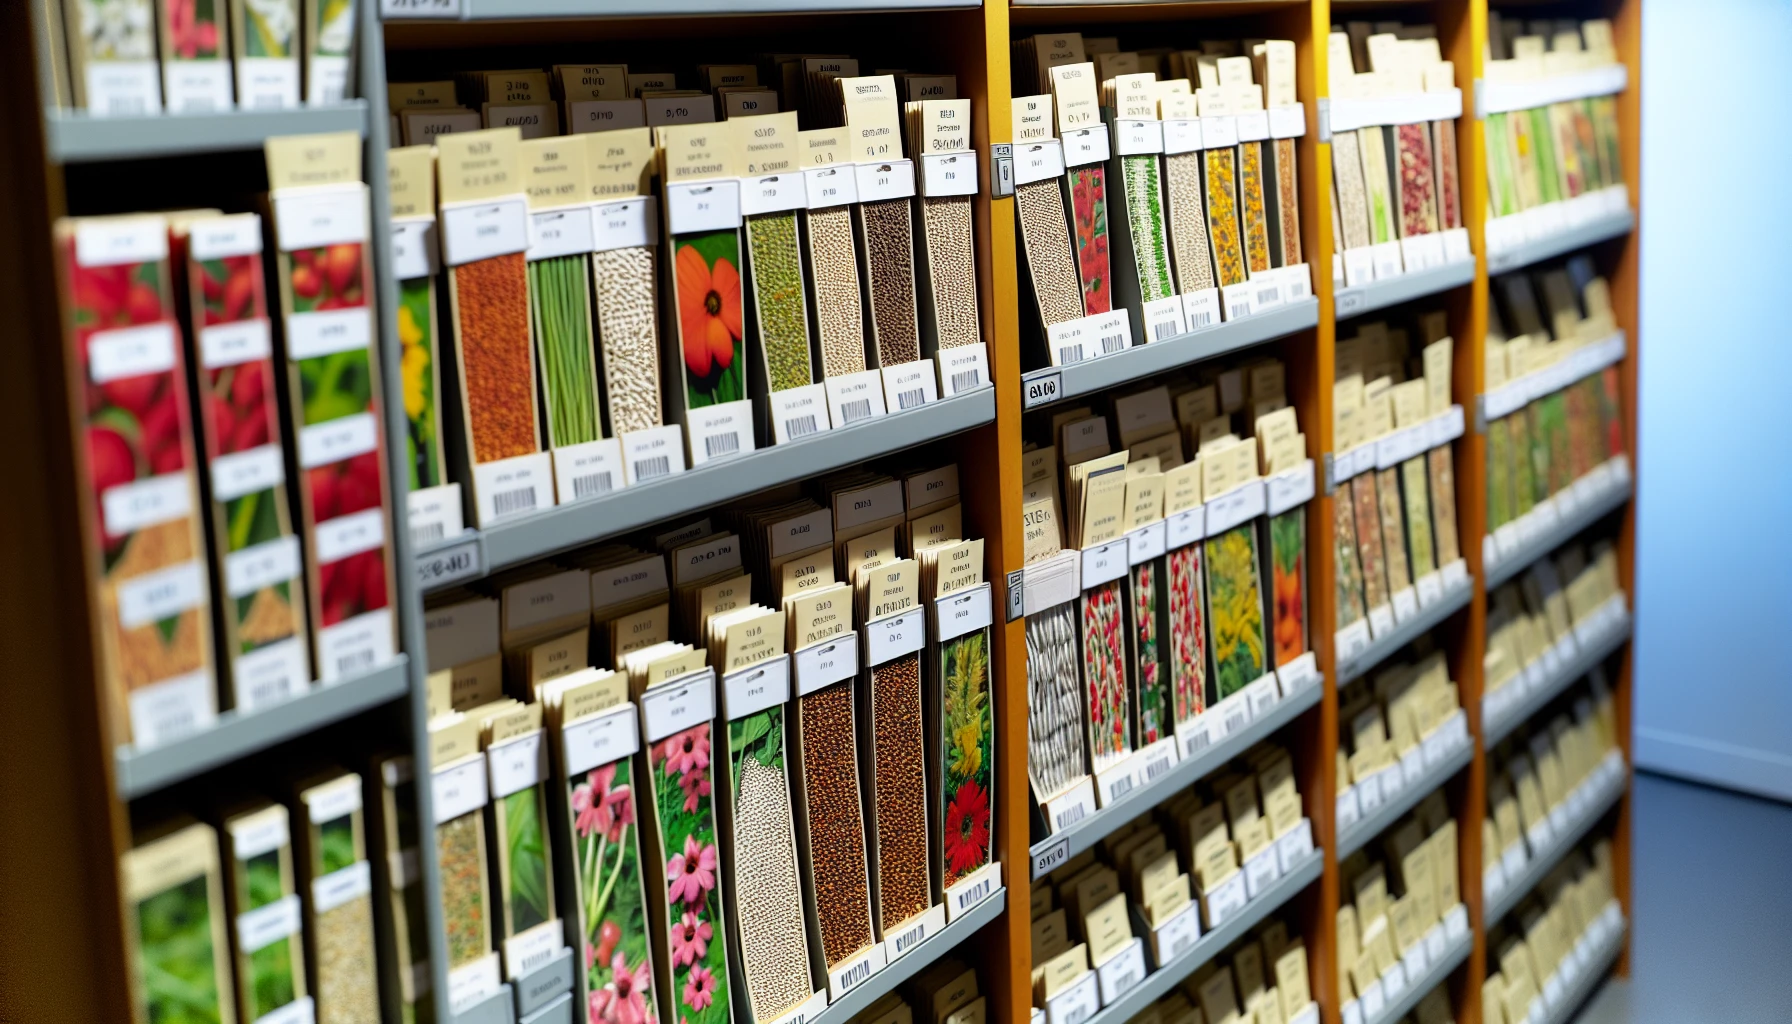 An open seed vault with an assortment of open-pollinated and hybrid seeds